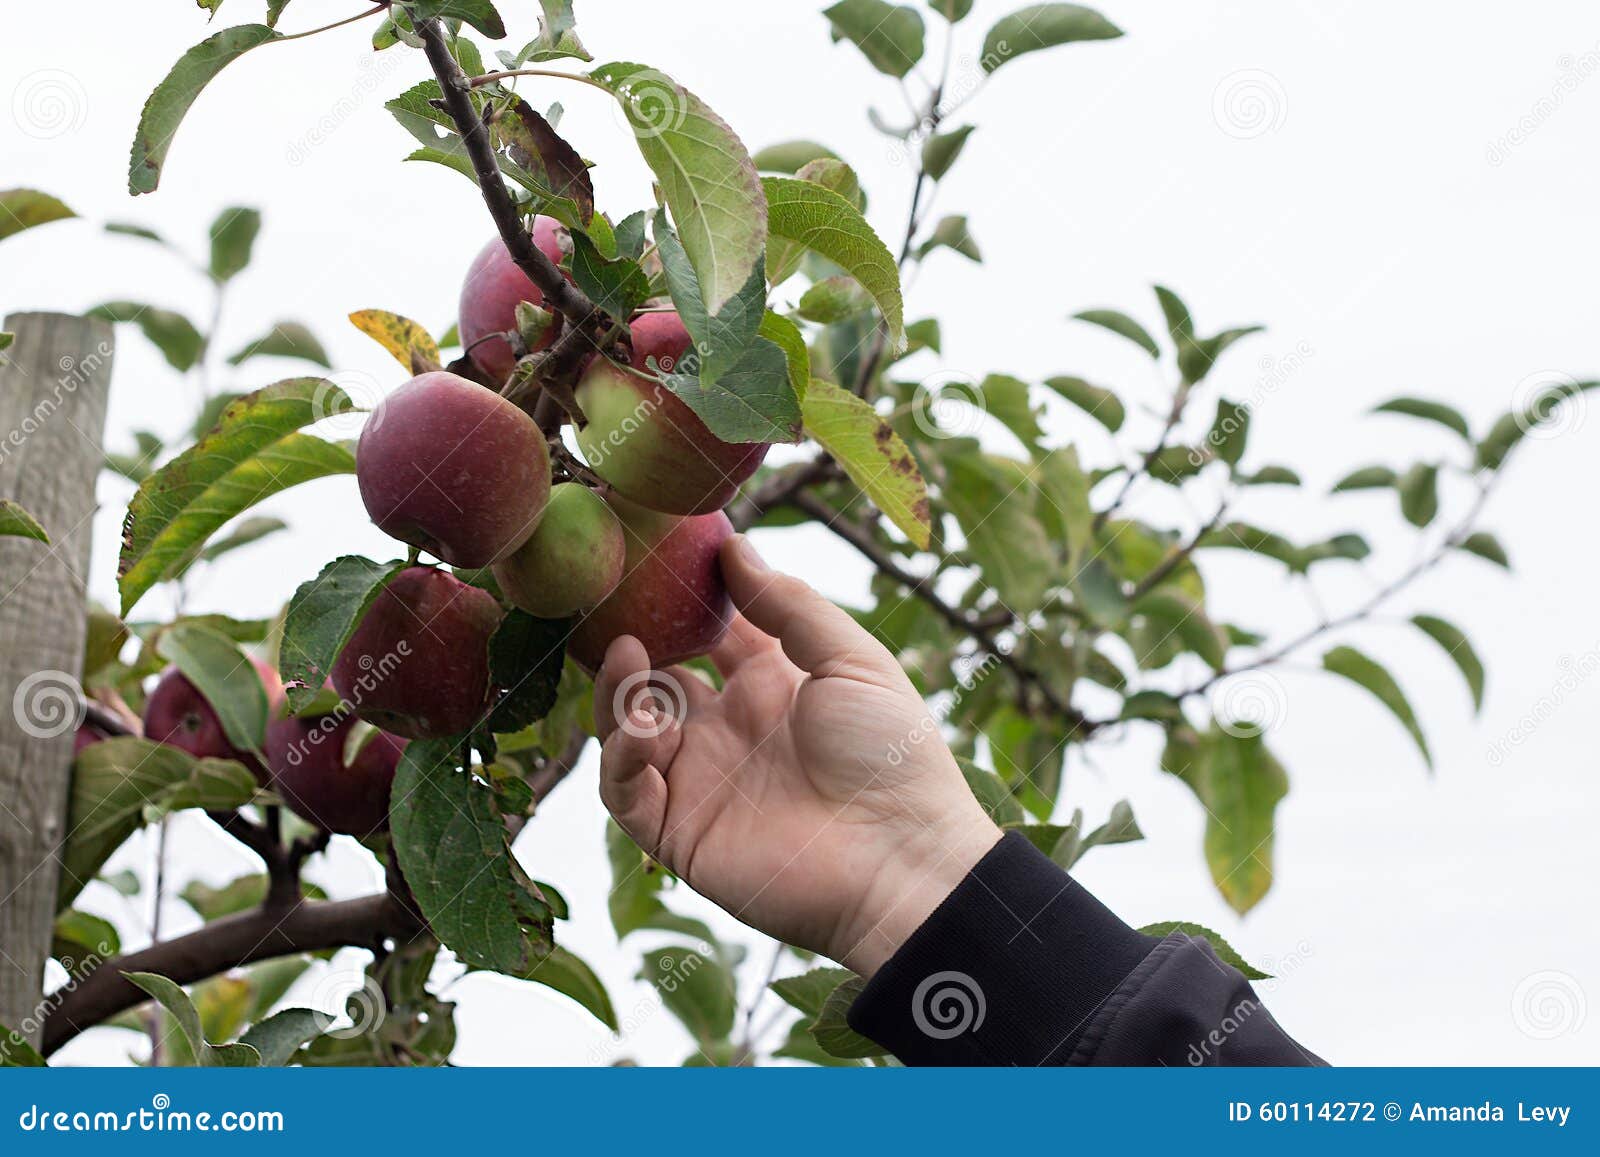 male hand picking macintosh apple from the tree